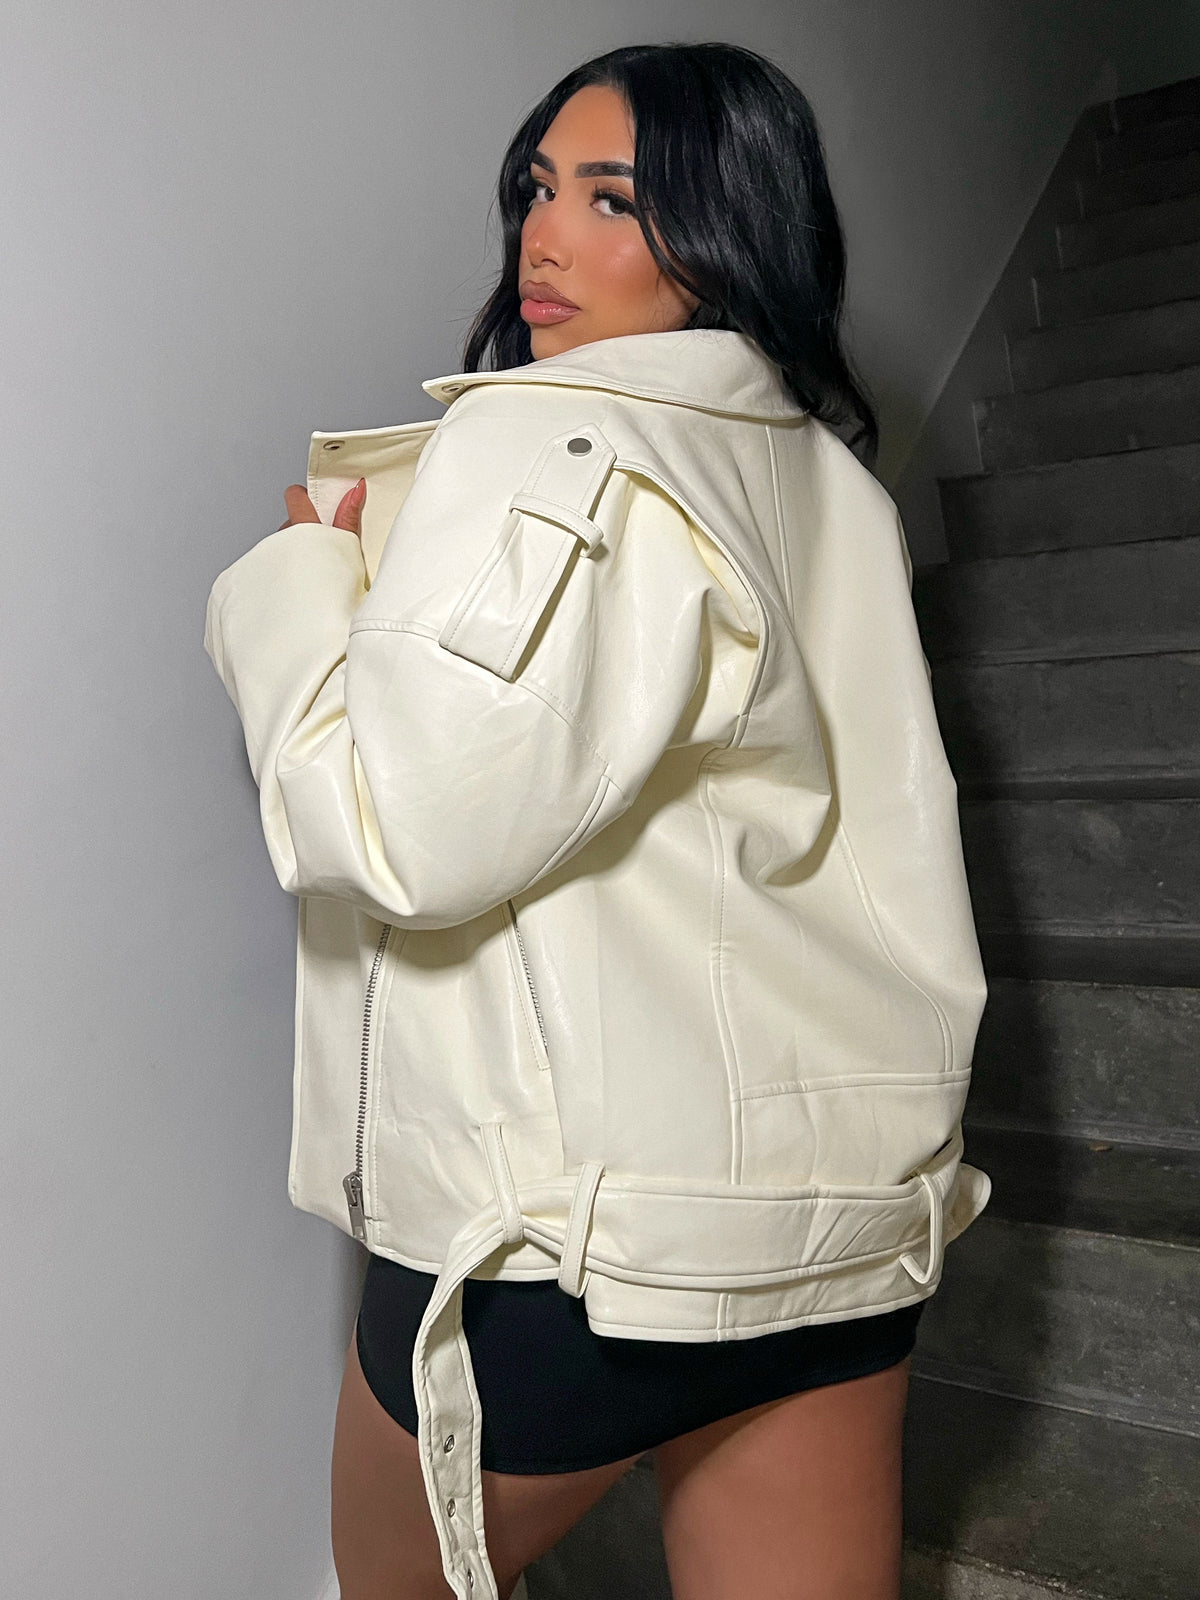 Missguided Cream Faux Leather Oversized Biker Jacket  Faux leather jacket  outfit, White leather jacket outfit, Beige leather jacket